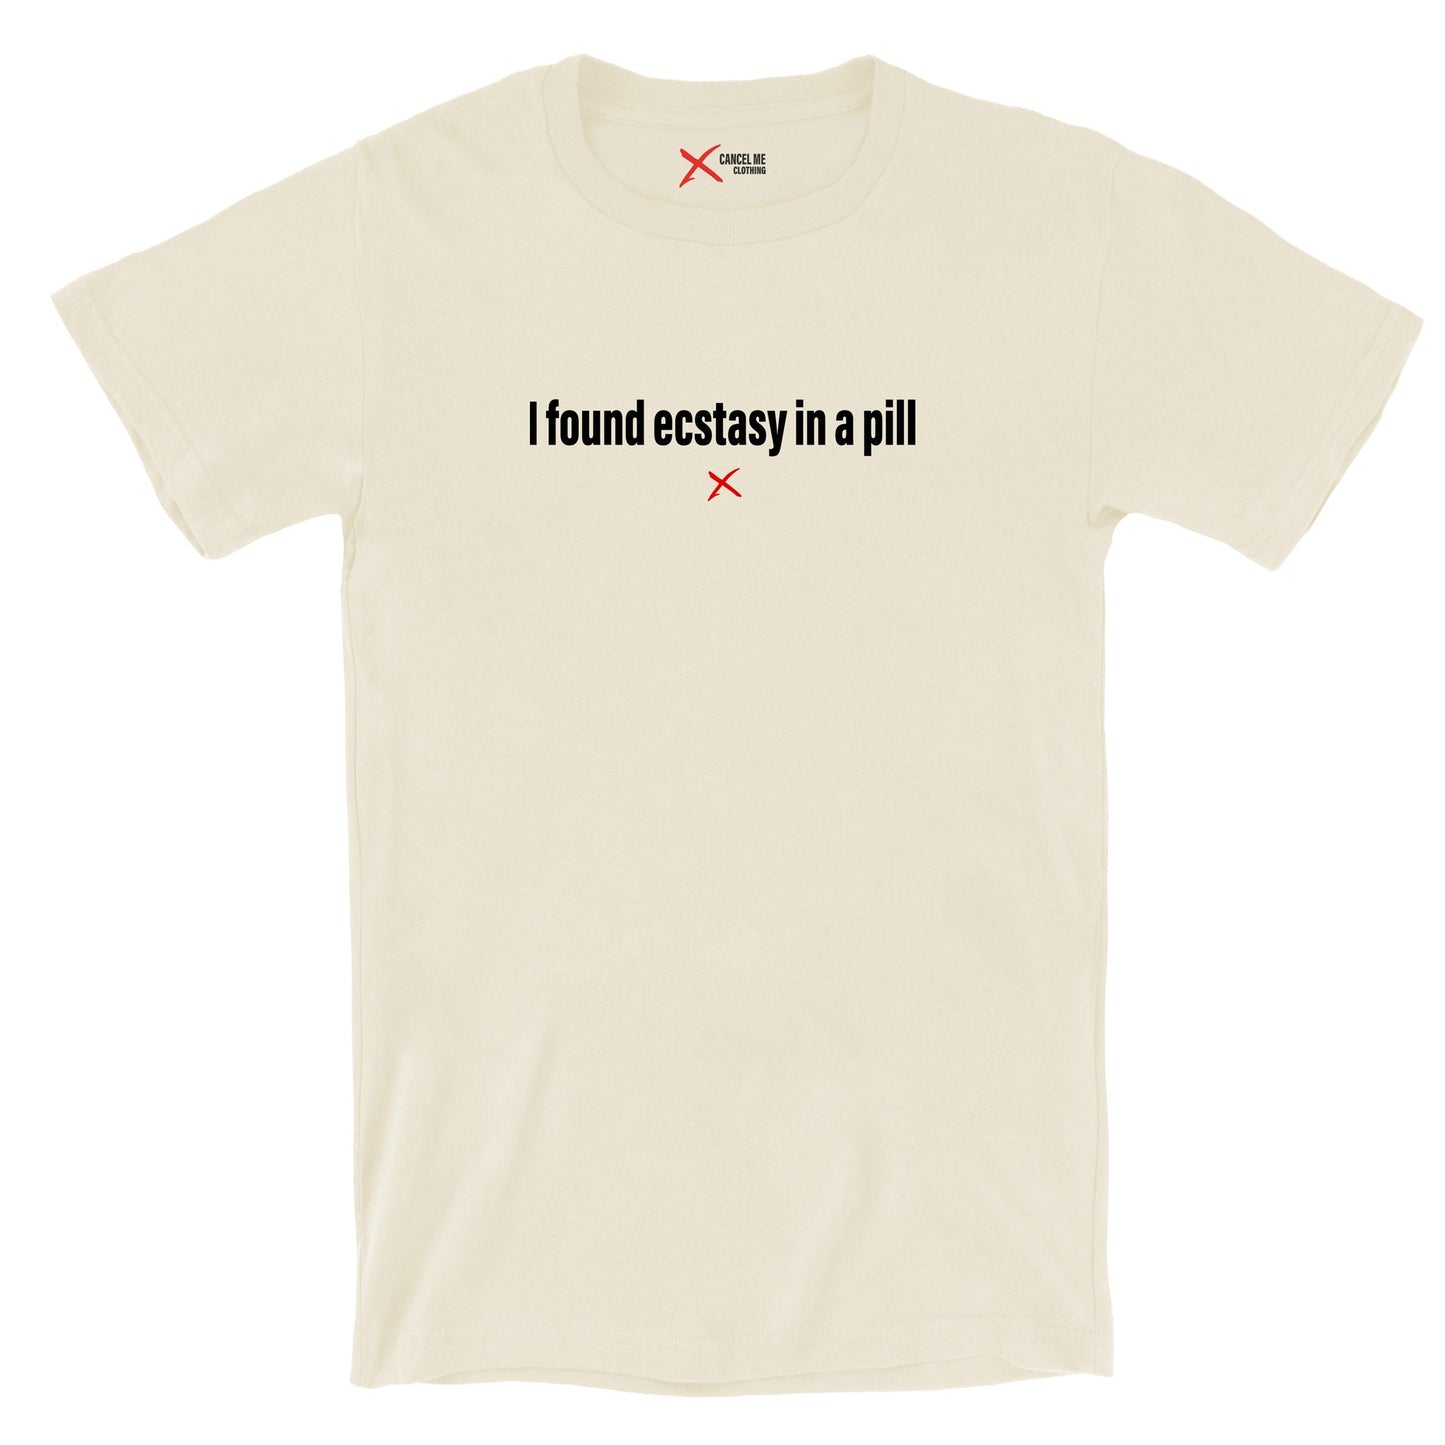 I found ecstasy in a pill - Shirt